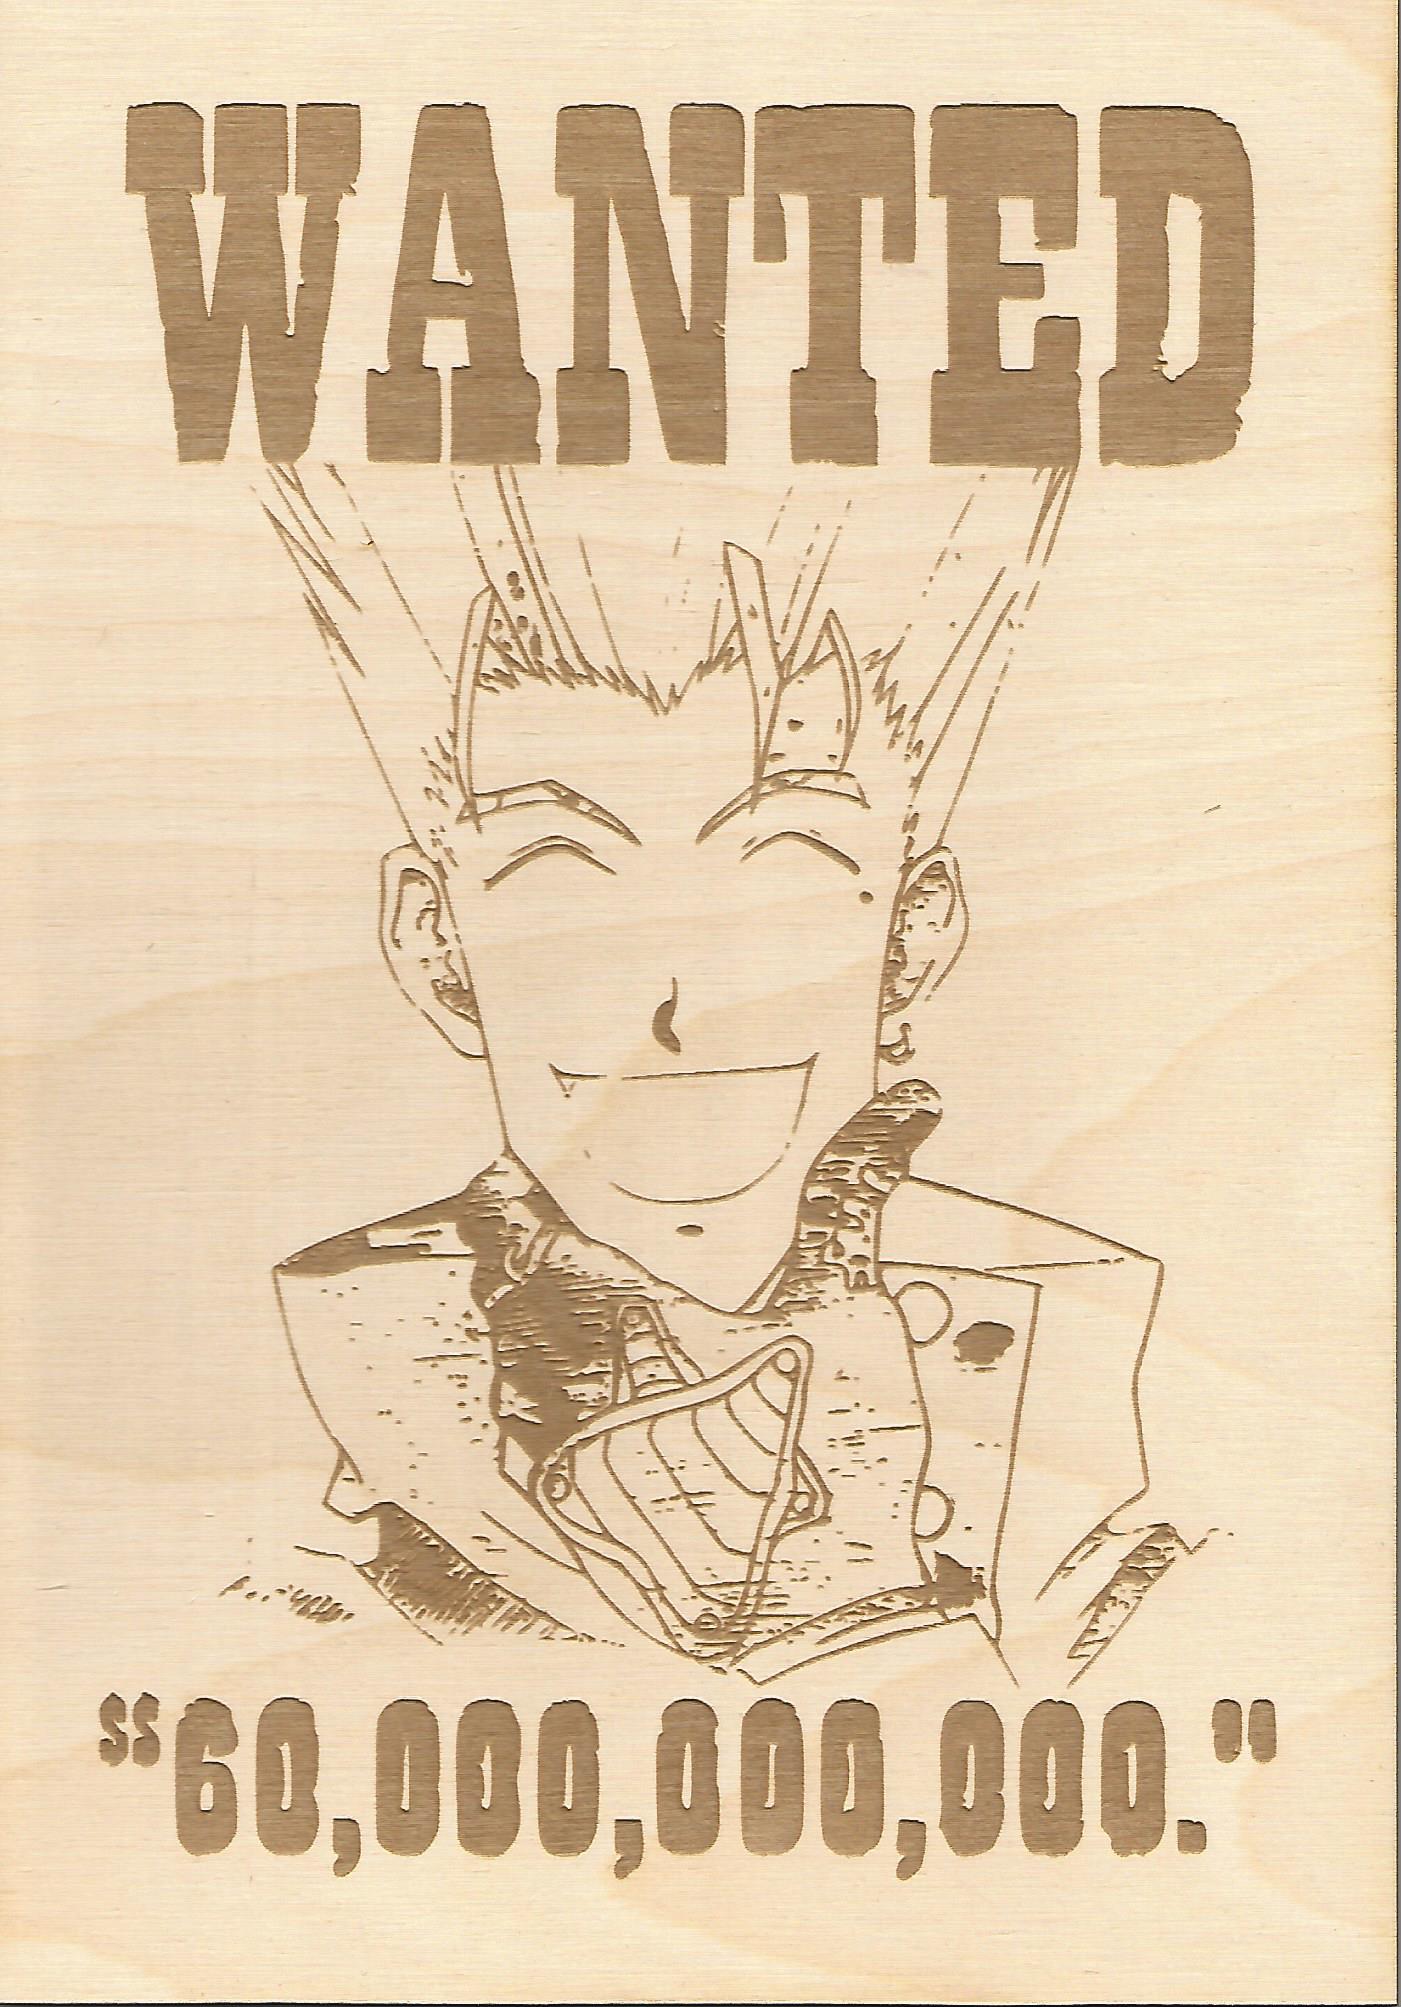 Trigun- Vash the Stampede Wooden Wanted Poster - TantrumCollectibles.com